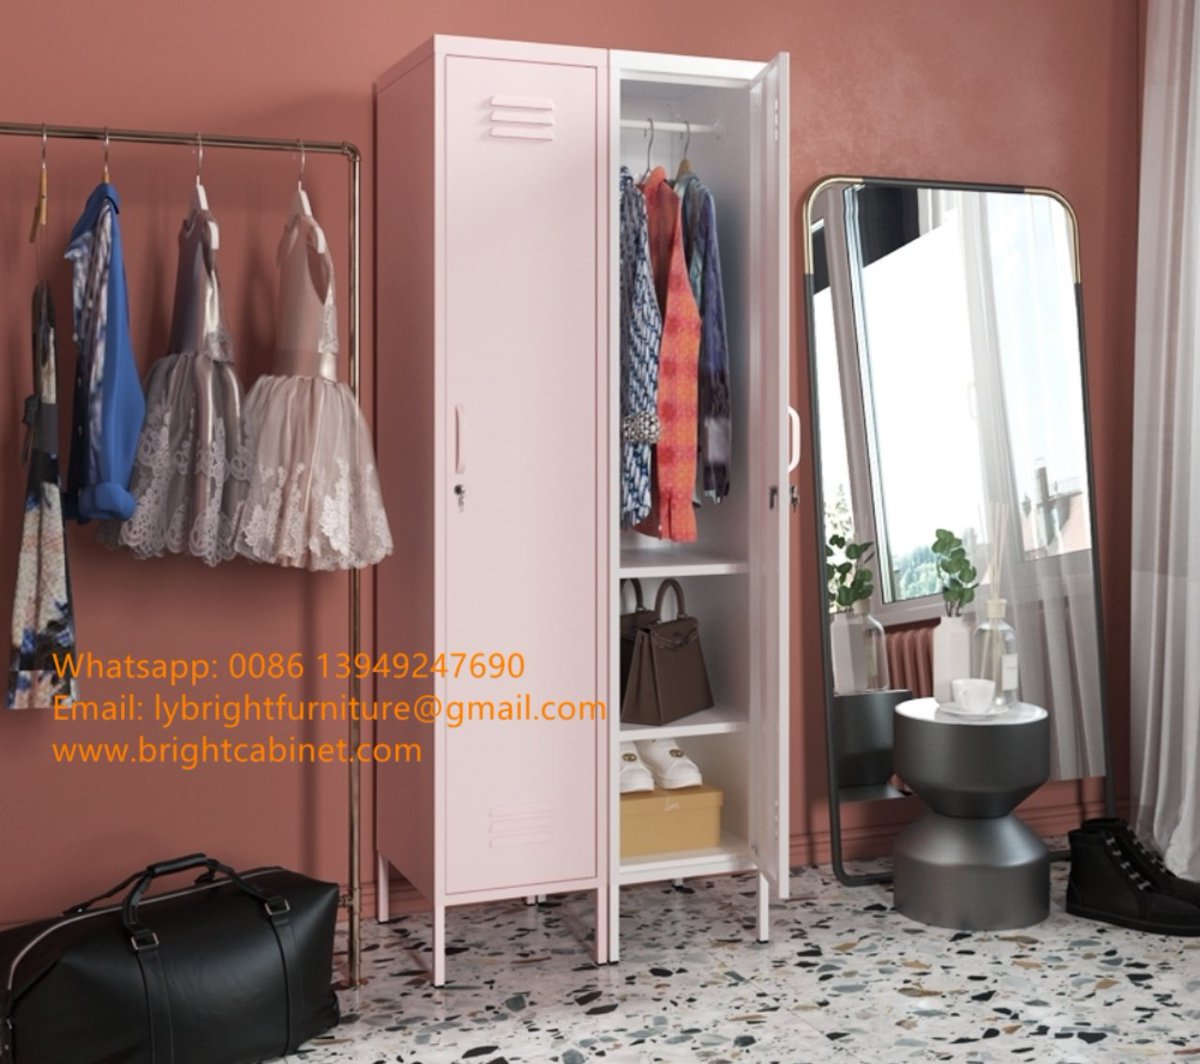 Welcome for new orders on 
metal home storage furniture.
+ Elegant simple design
+ Wonderful painting finish 
+ Flat mail order package
+ Competitive price
#ikeastyle  #northeurope  #mailpackage  #amazonhot   #ebaytopseller   #metal #locker  #children #furniture  #oem   #china